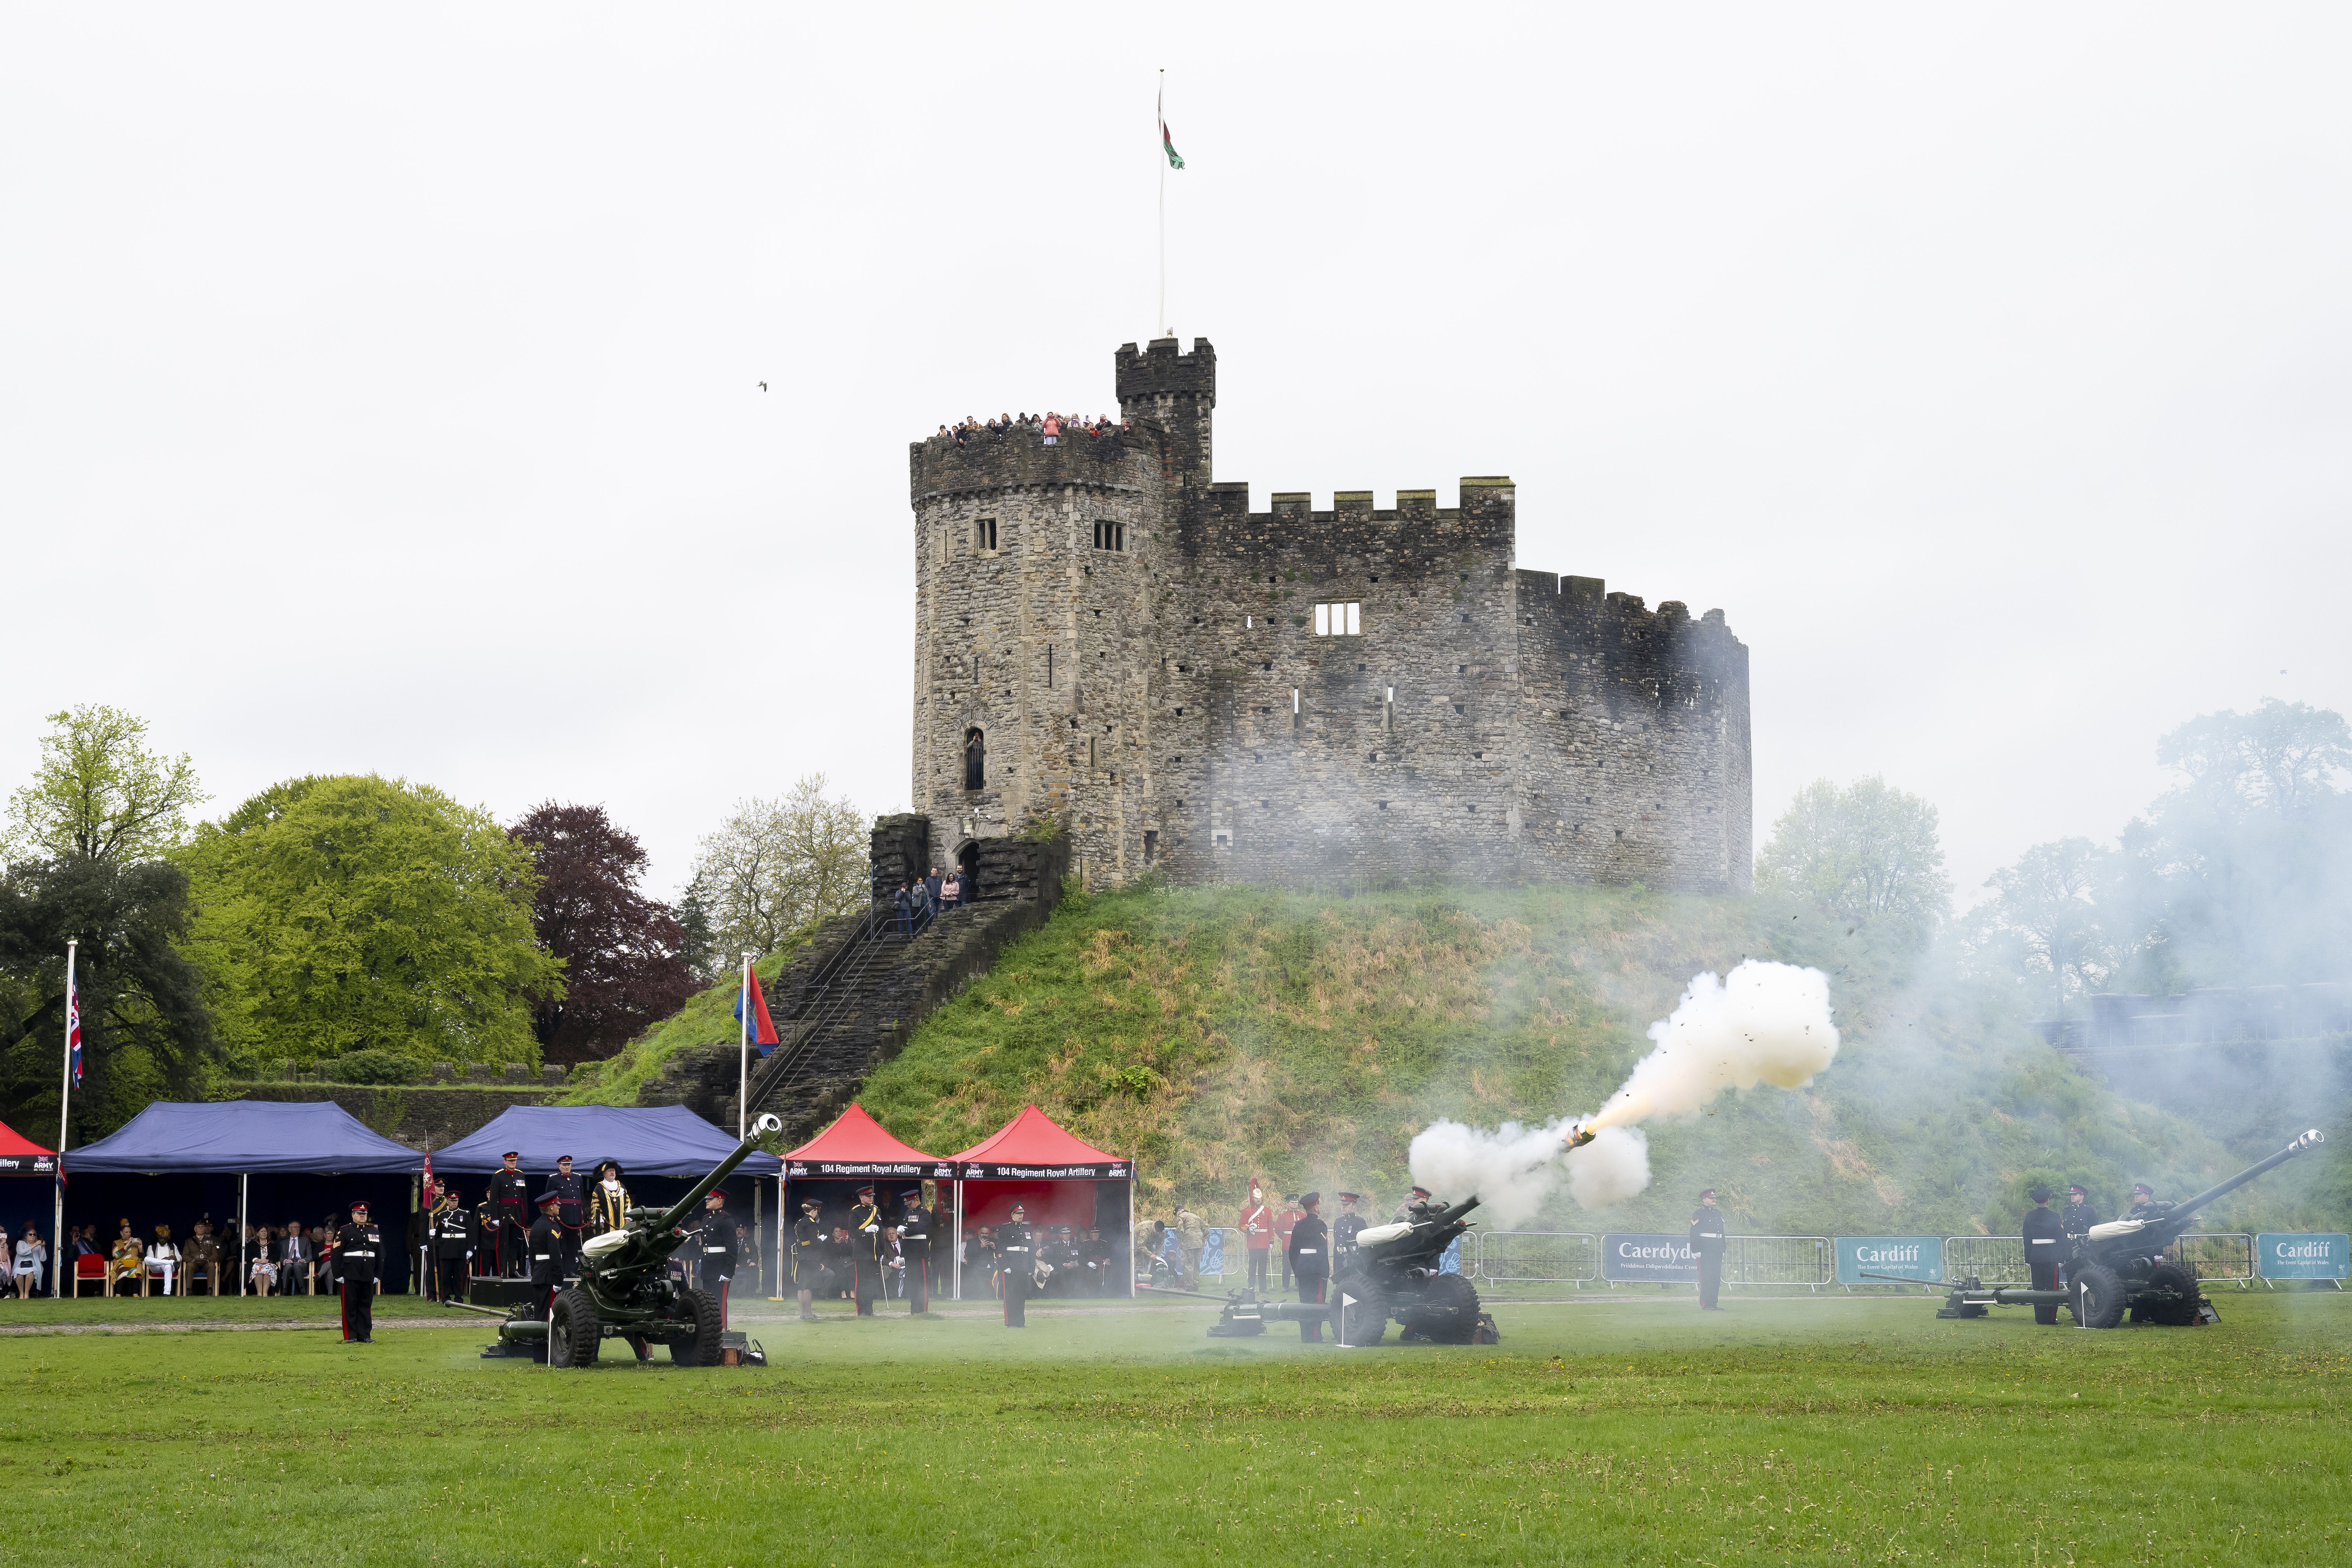 The 104 Regiment Royal Artillery fire rounds at Cardiff Castle during the Coronation of King Charles III and Queen Camilla on May 6, 2023 in Cardiff, Wales